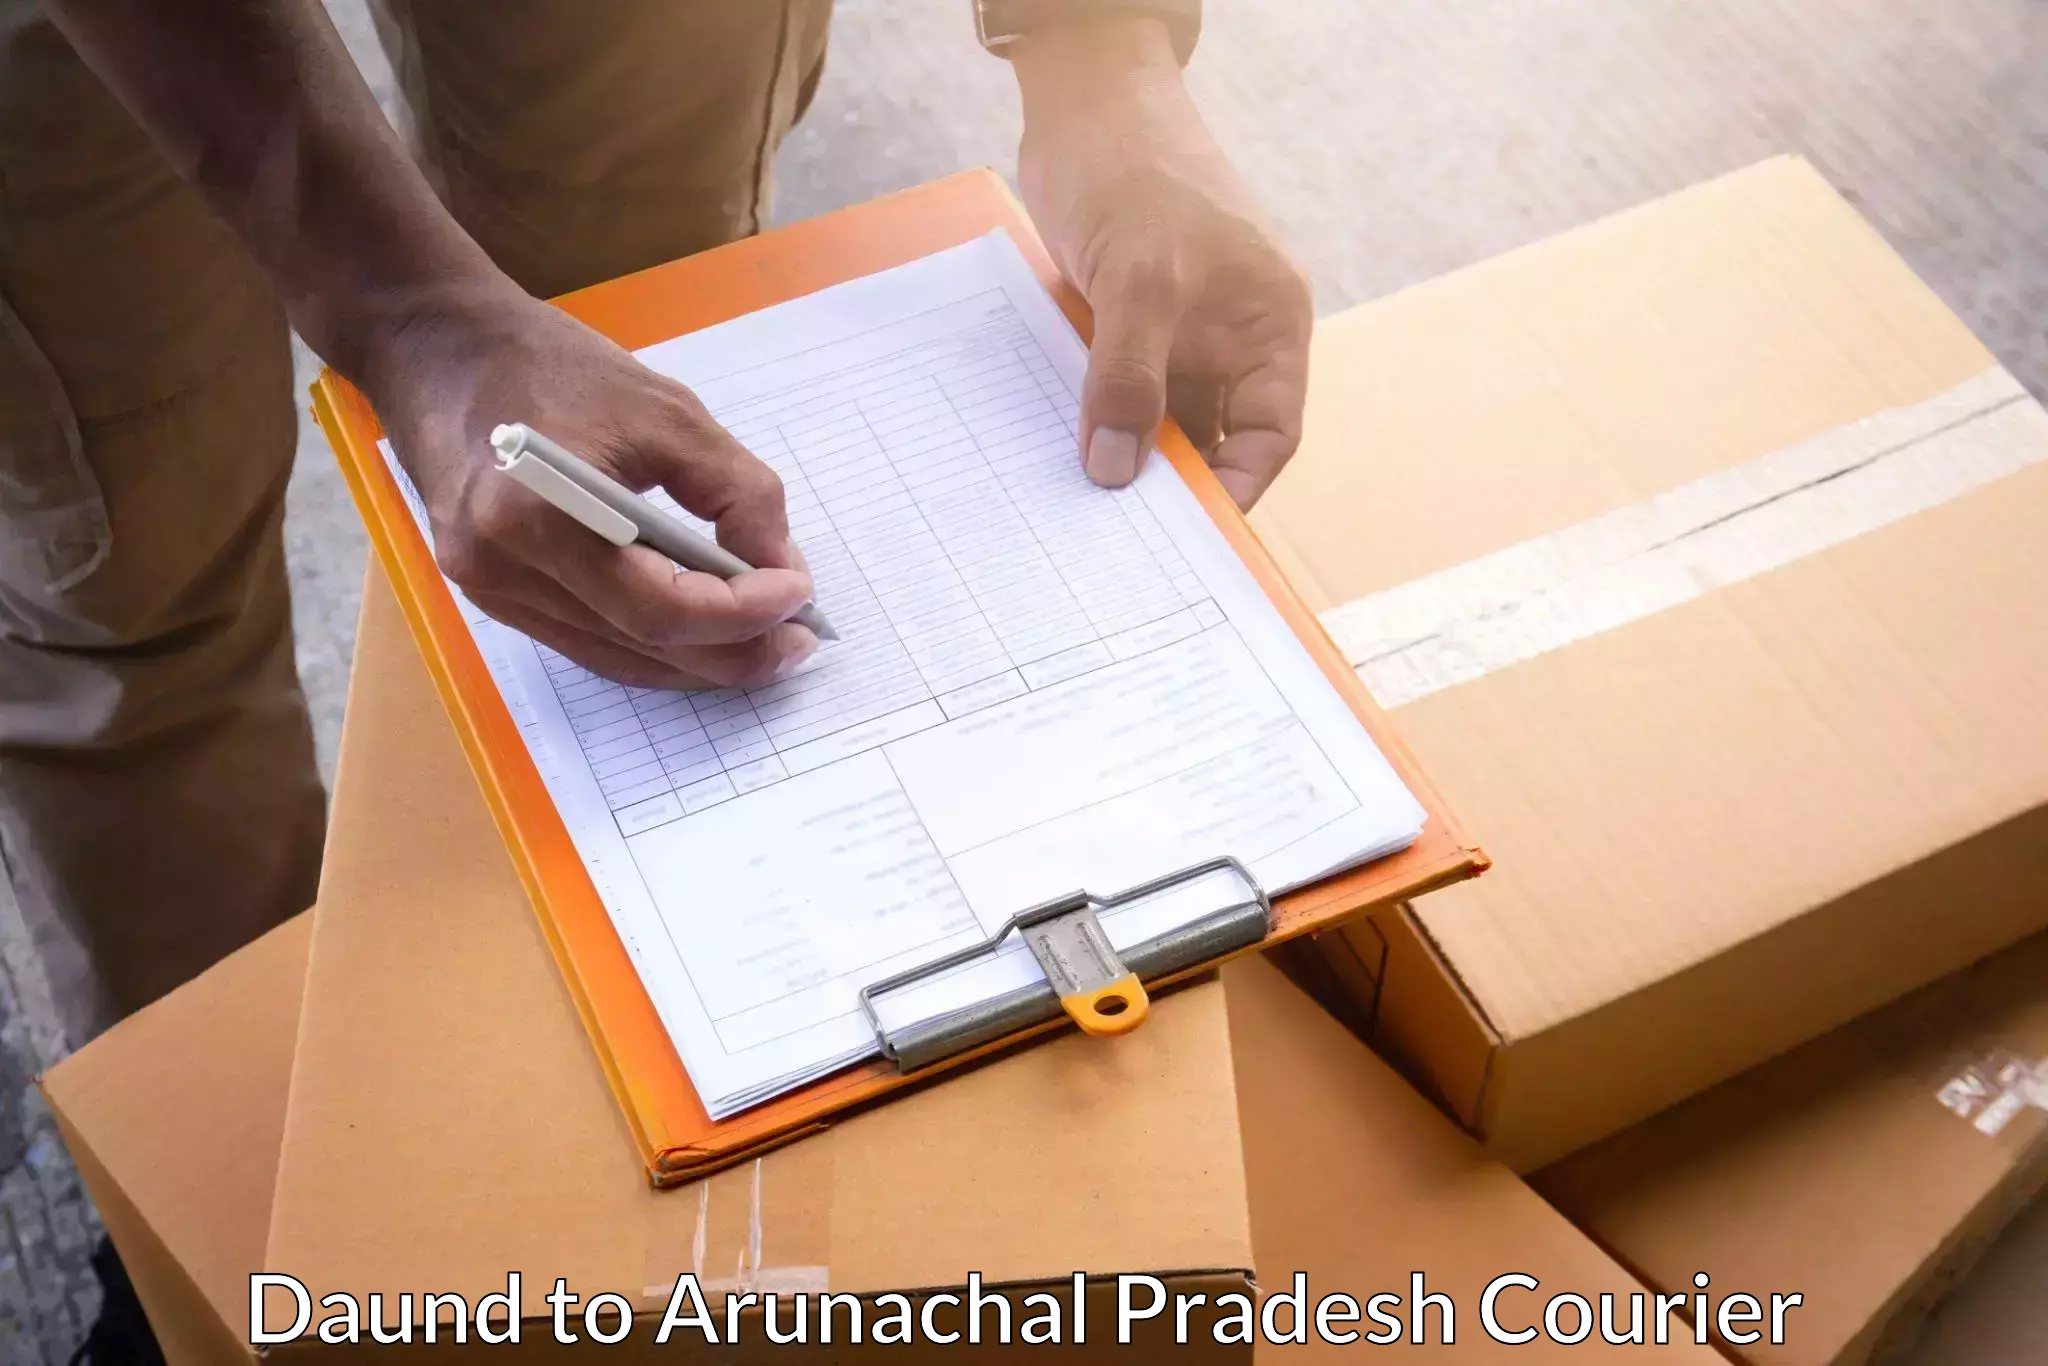 Reliable courier service in Daund to Deomali